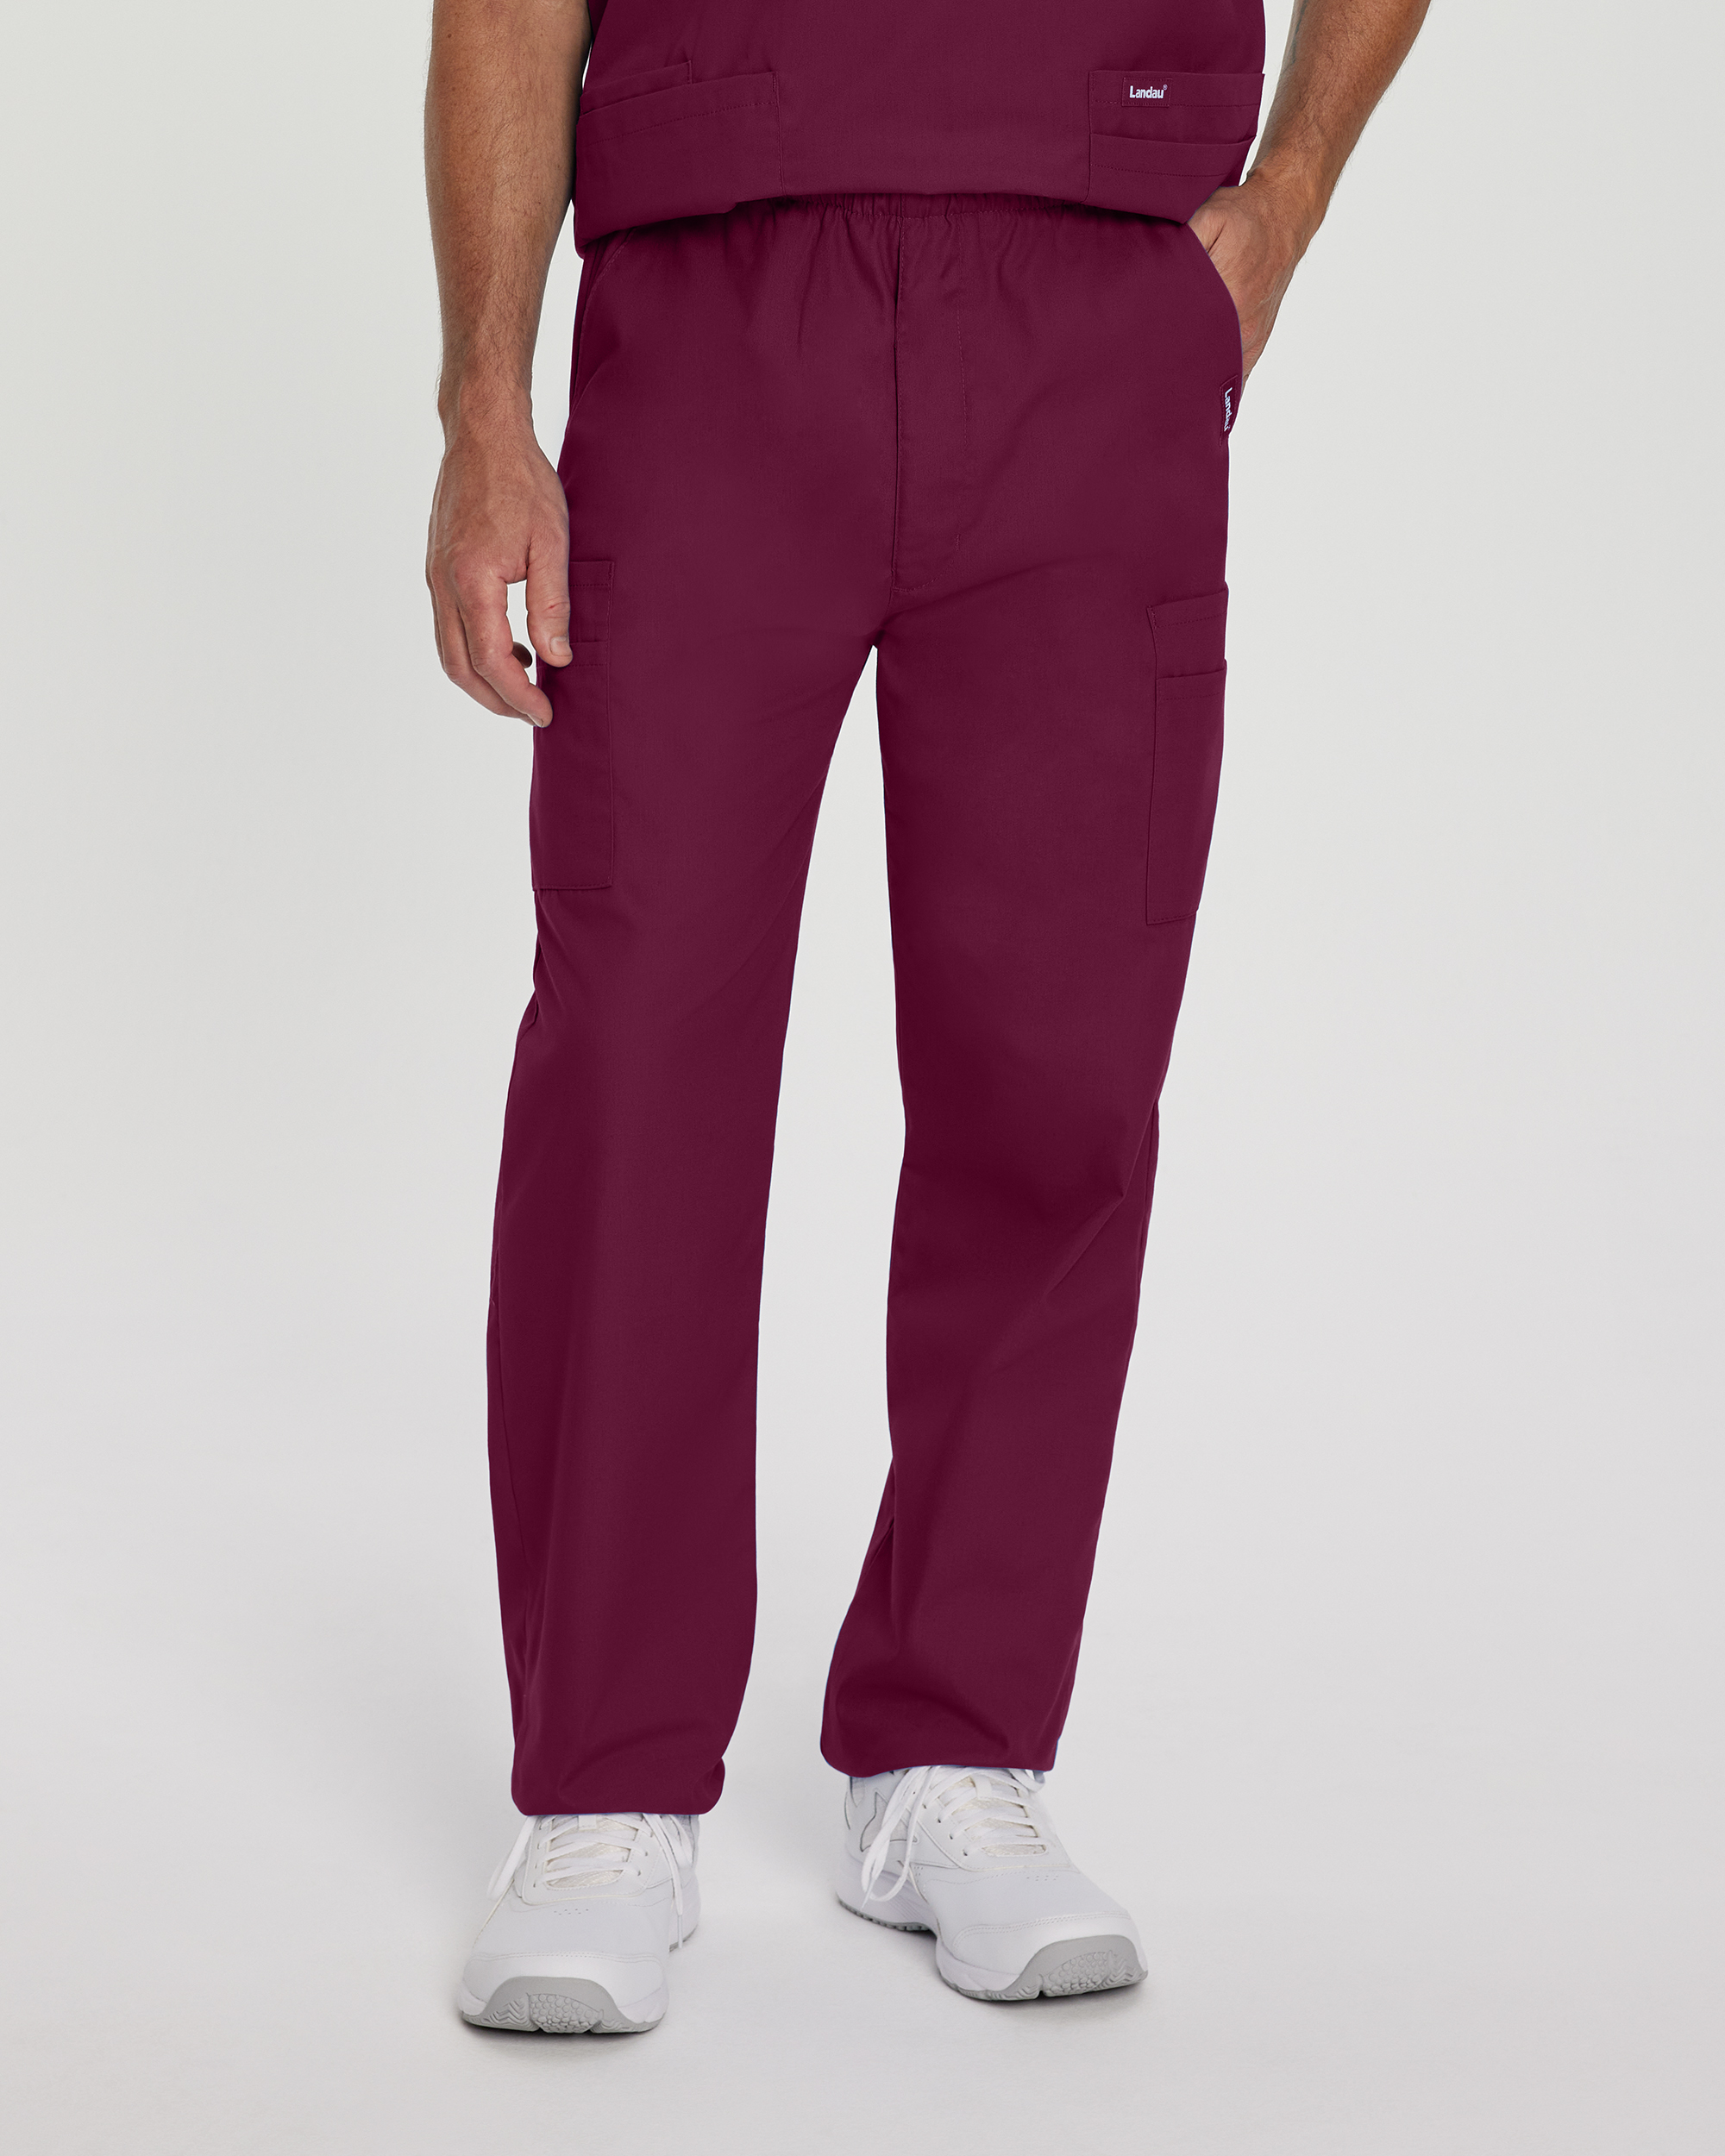 What is the fit of these scrub pants?